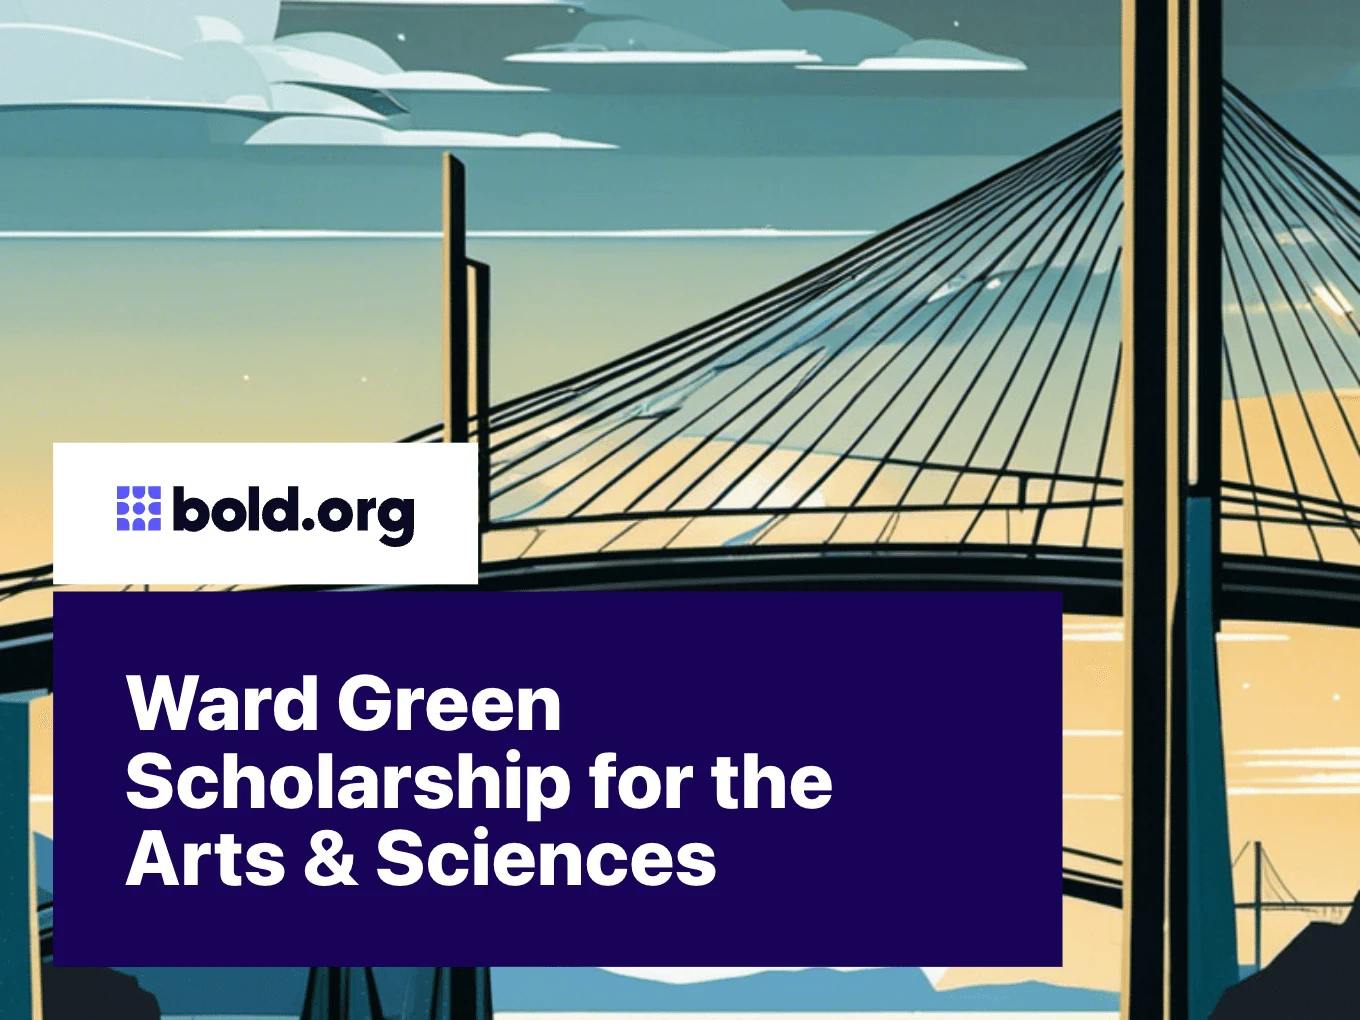 Ward Green Scholarship for the Arts & Sciences